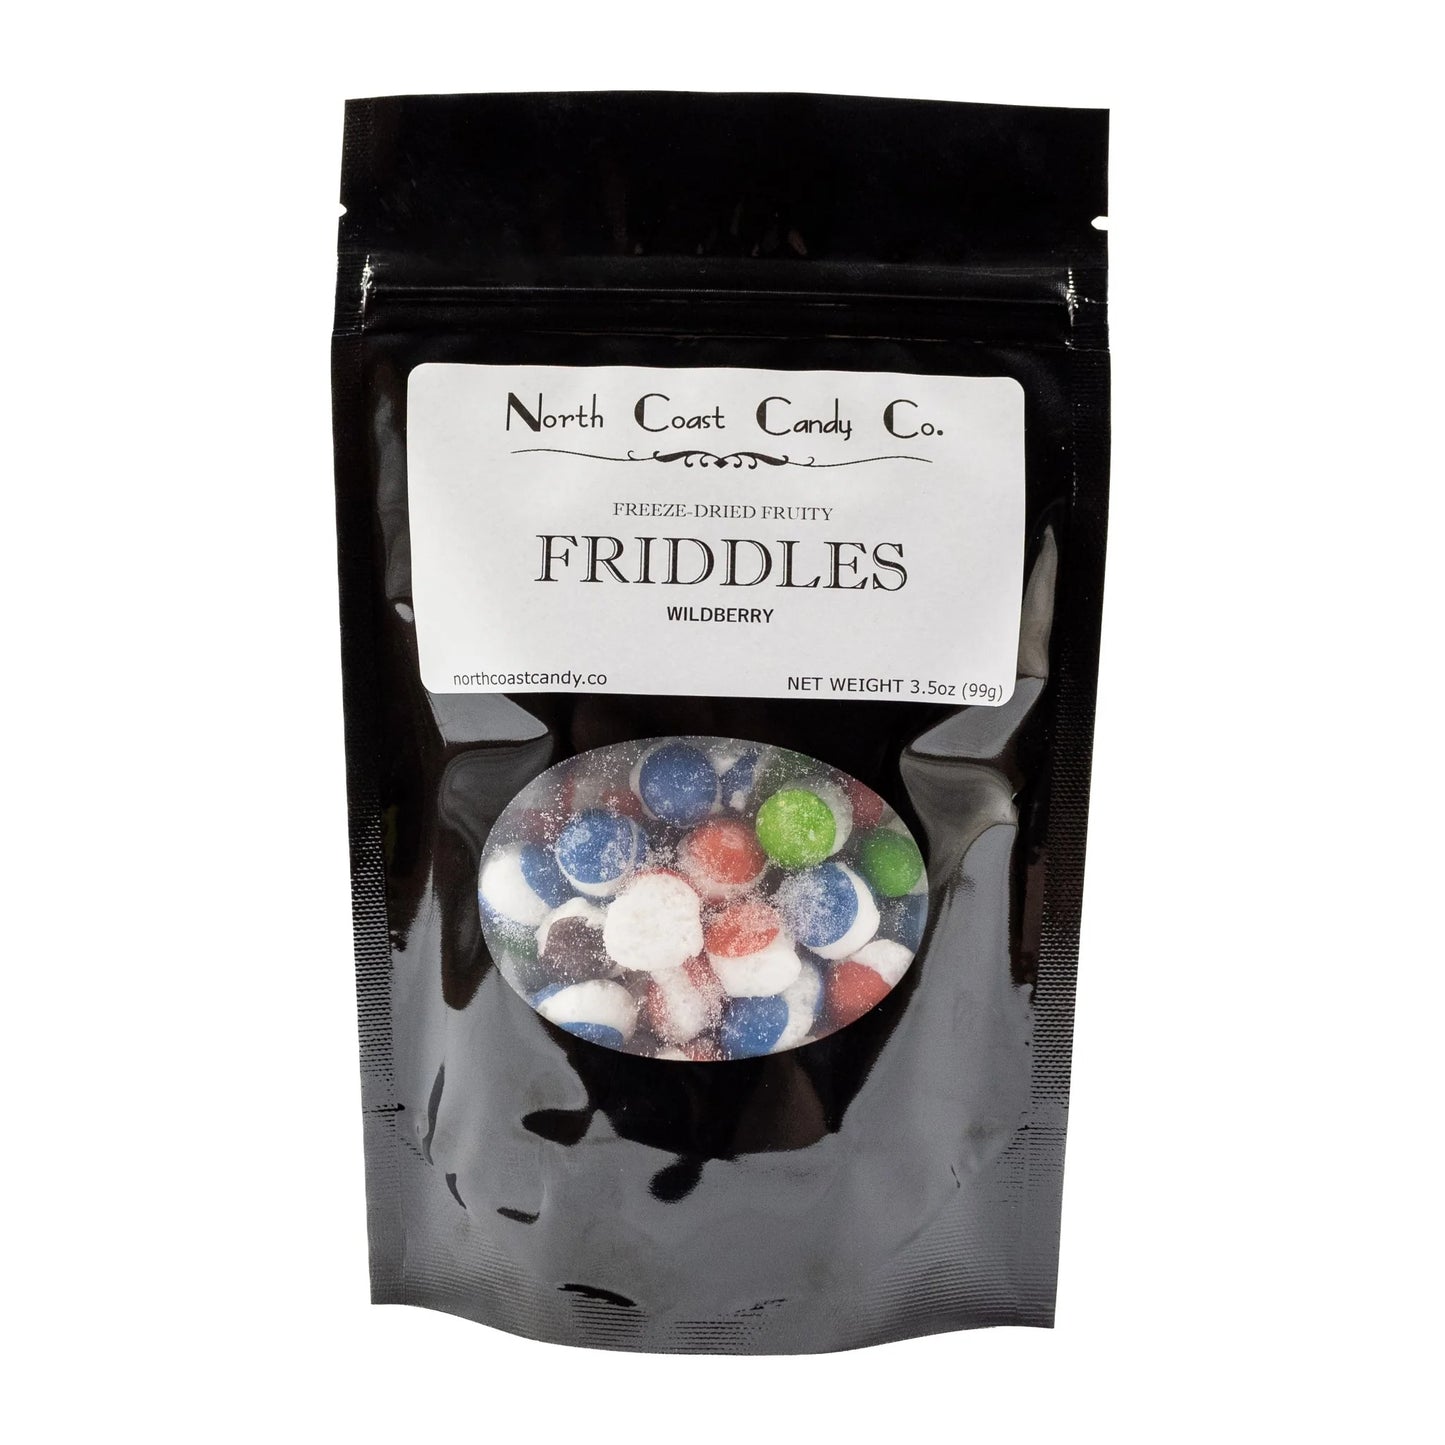 Wildberry Friddles Freeze-Dried Skittles